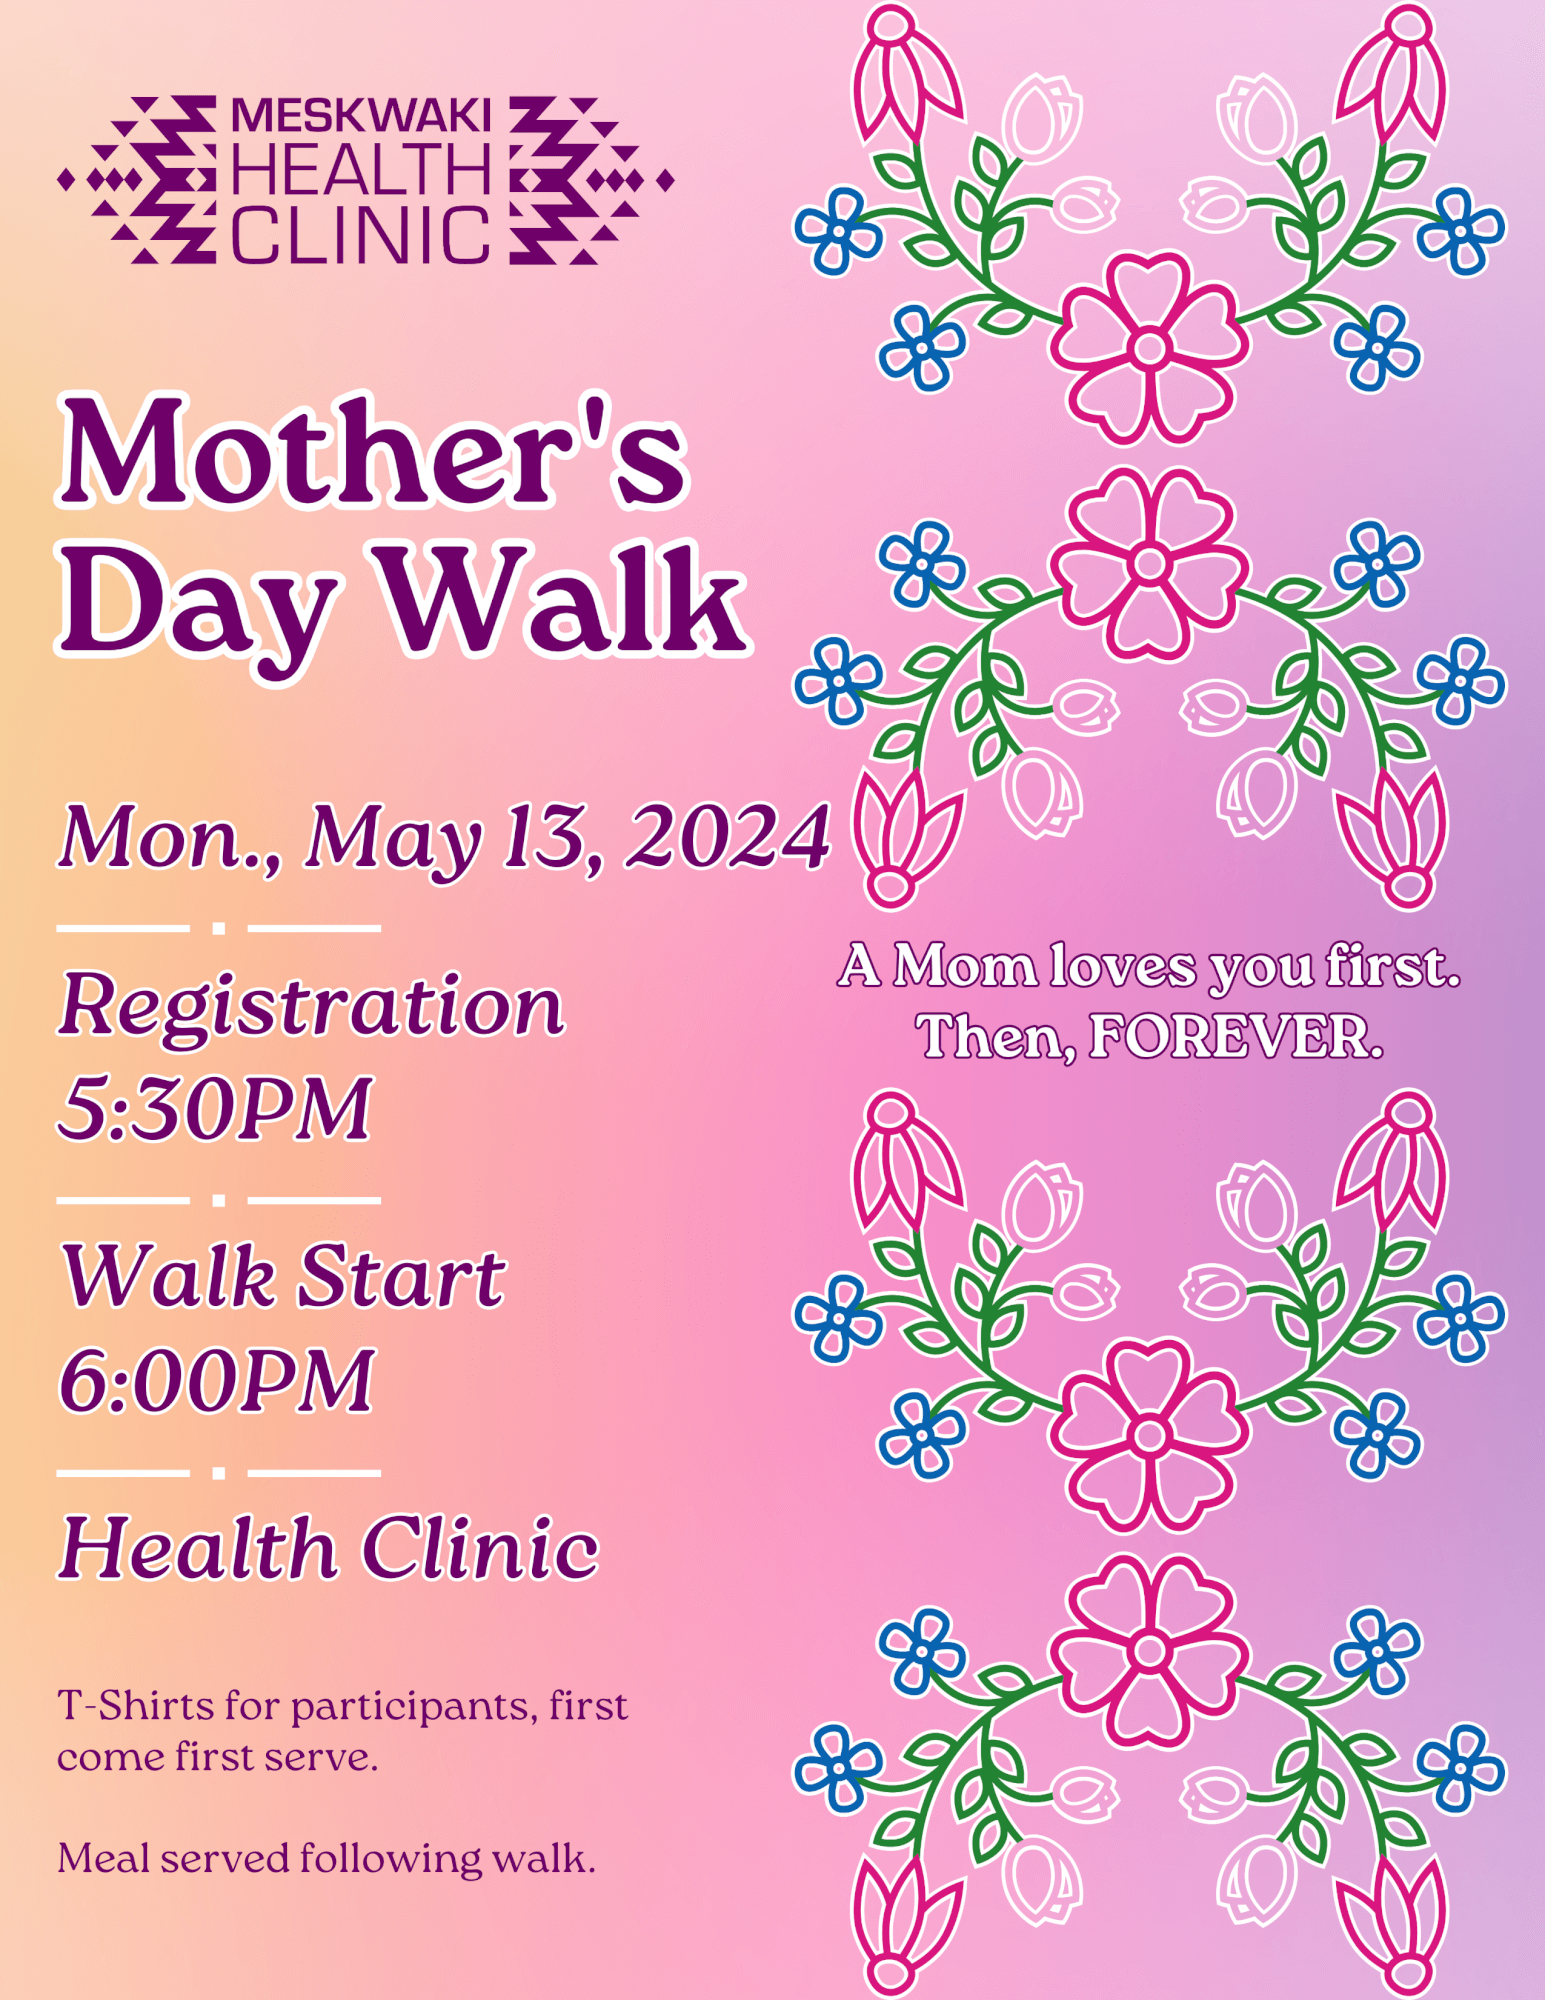 Mother’s Day Walk Rescheduled to May 13, 2024